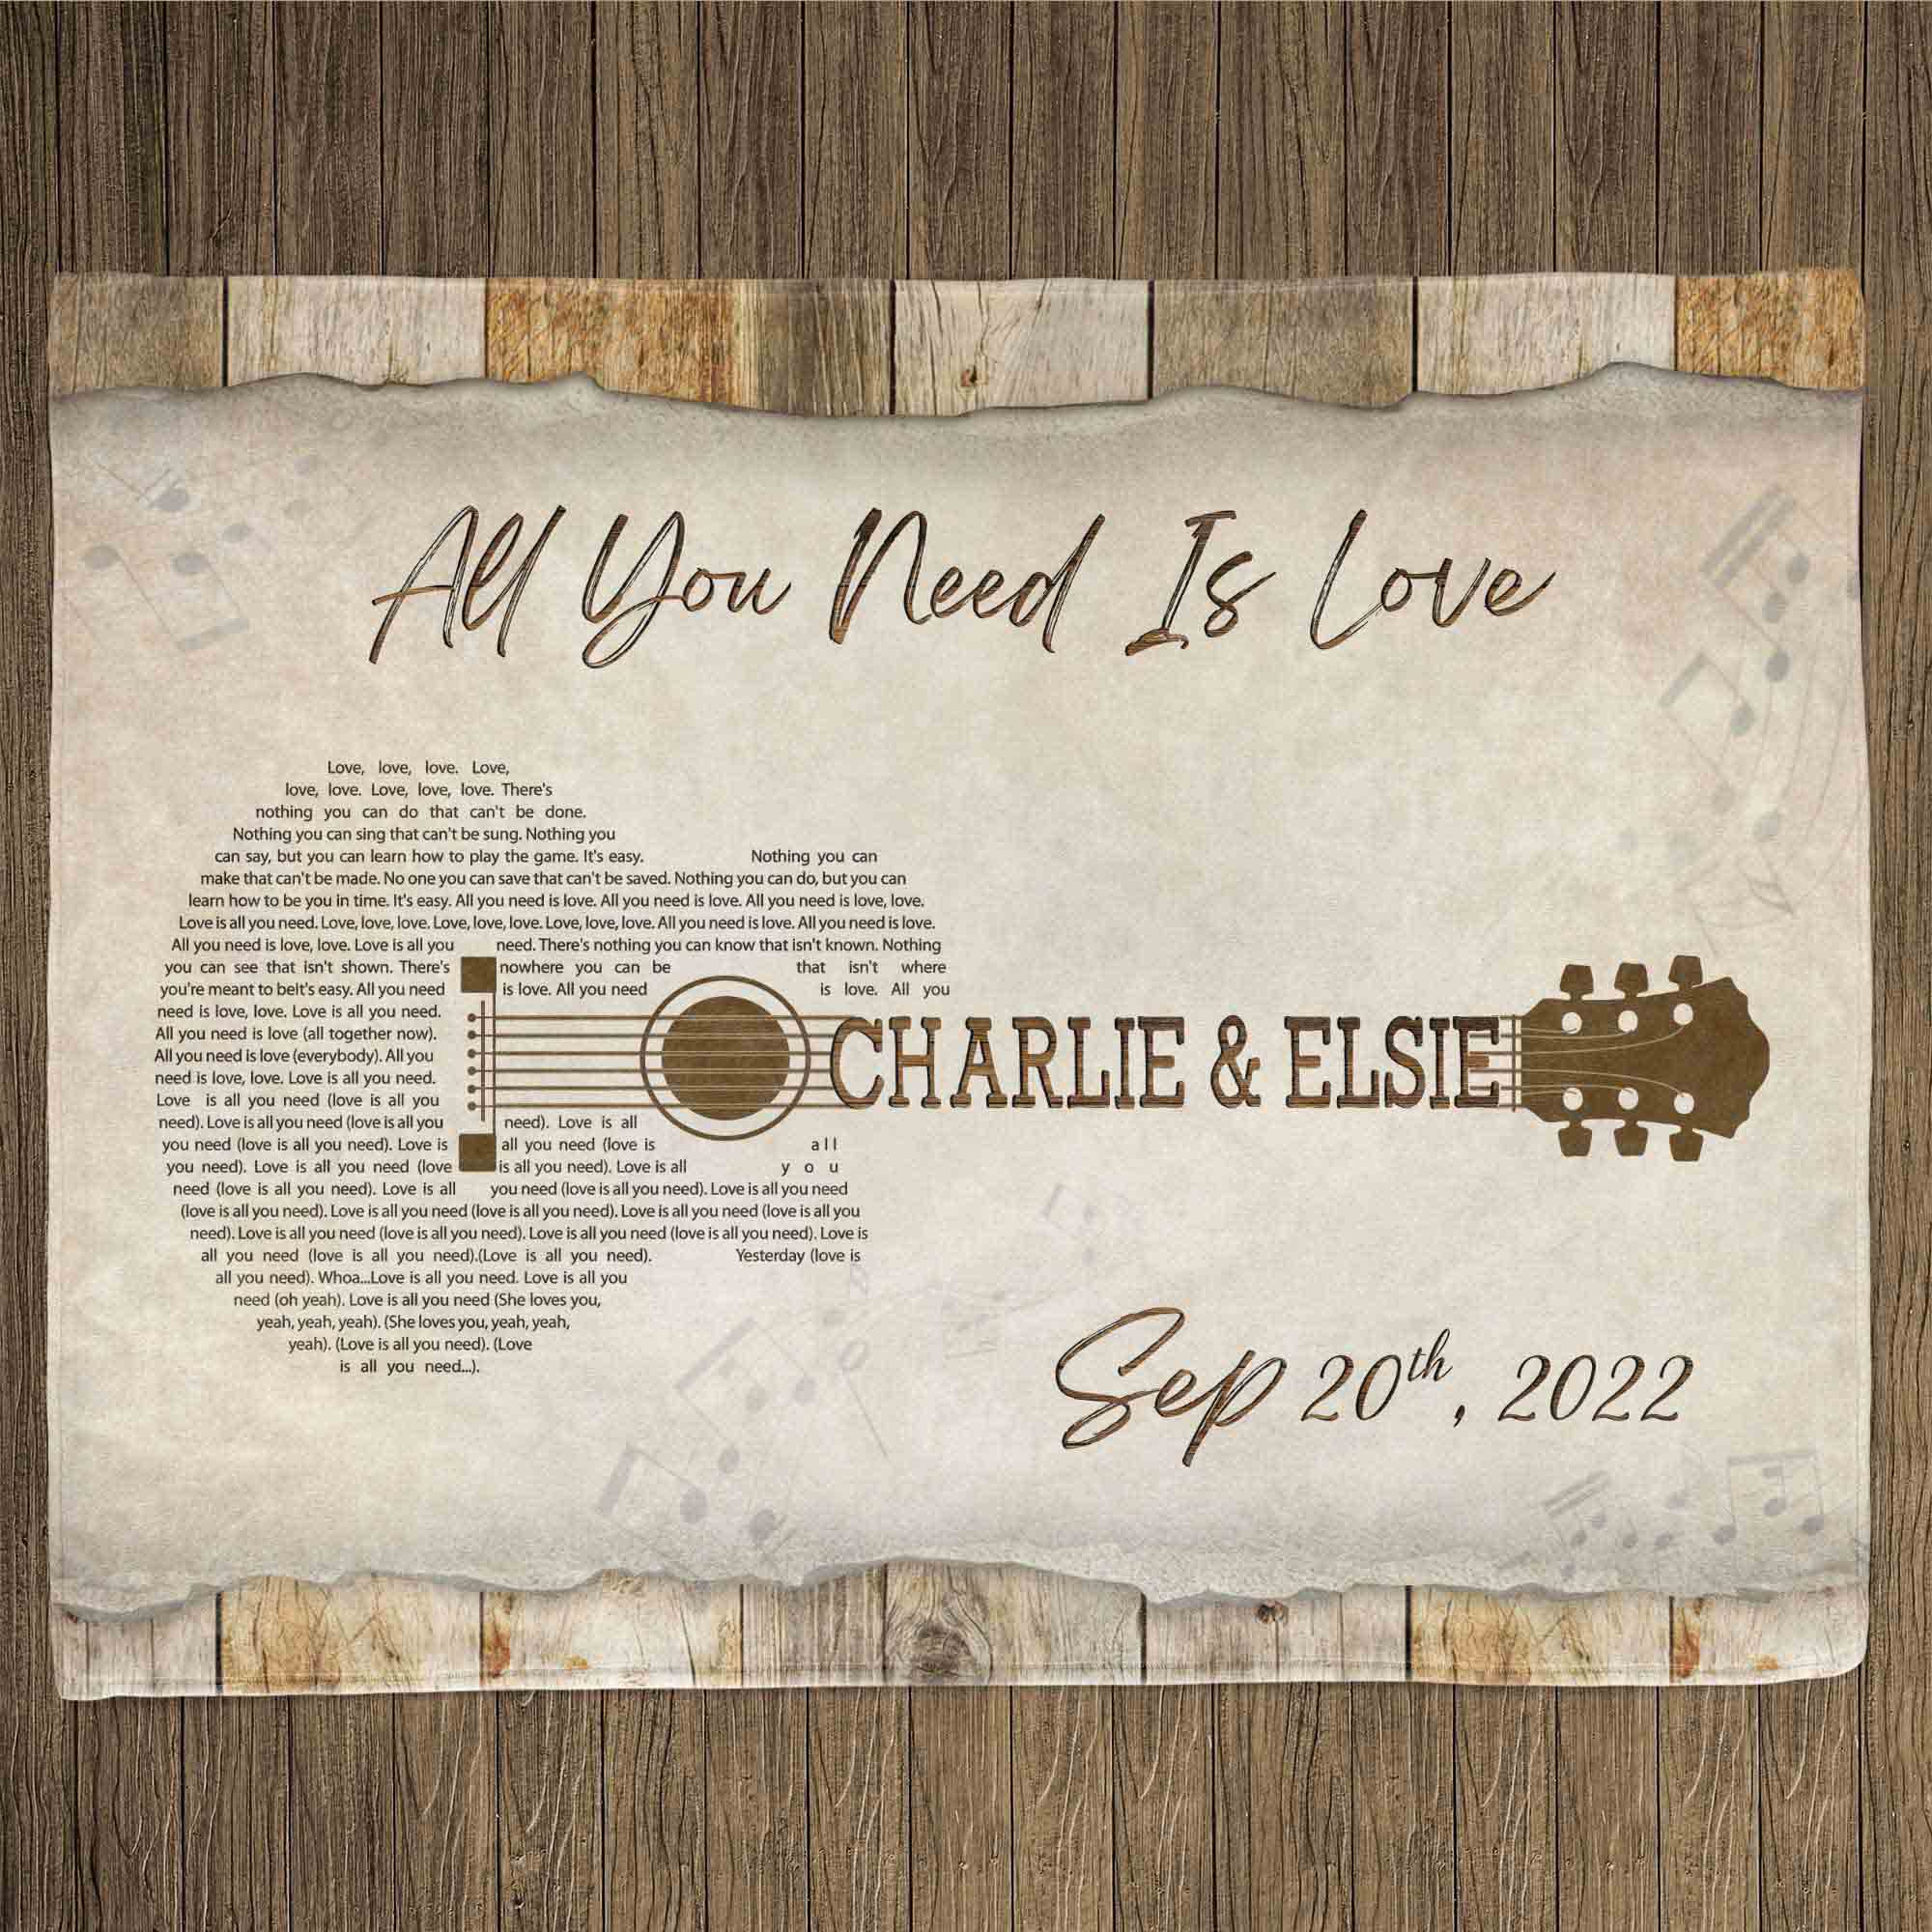 personalized song lyric gifts